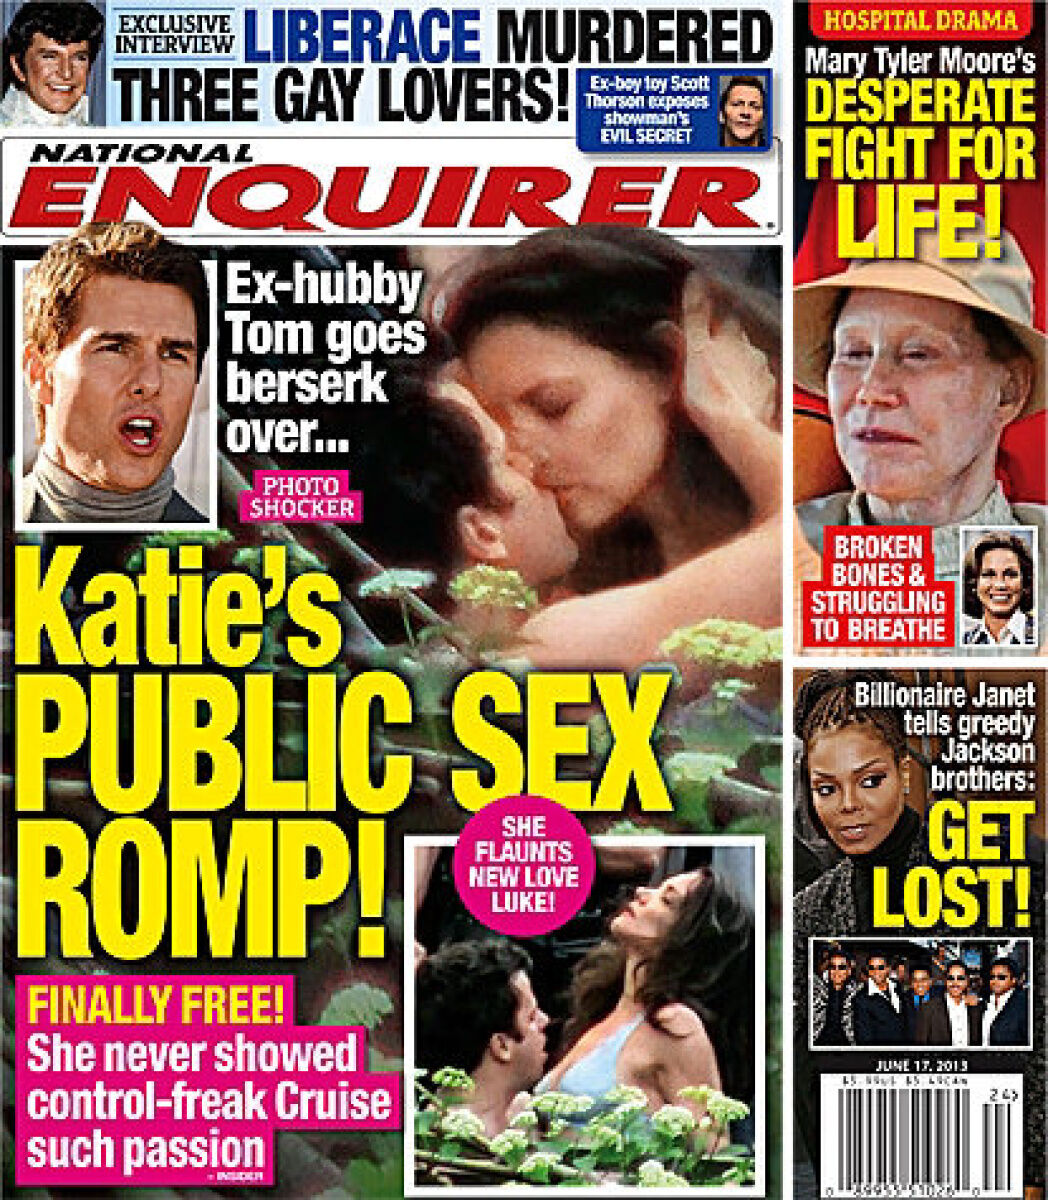 Tabloids Tom Cruise gets super-upset over fake public picture image